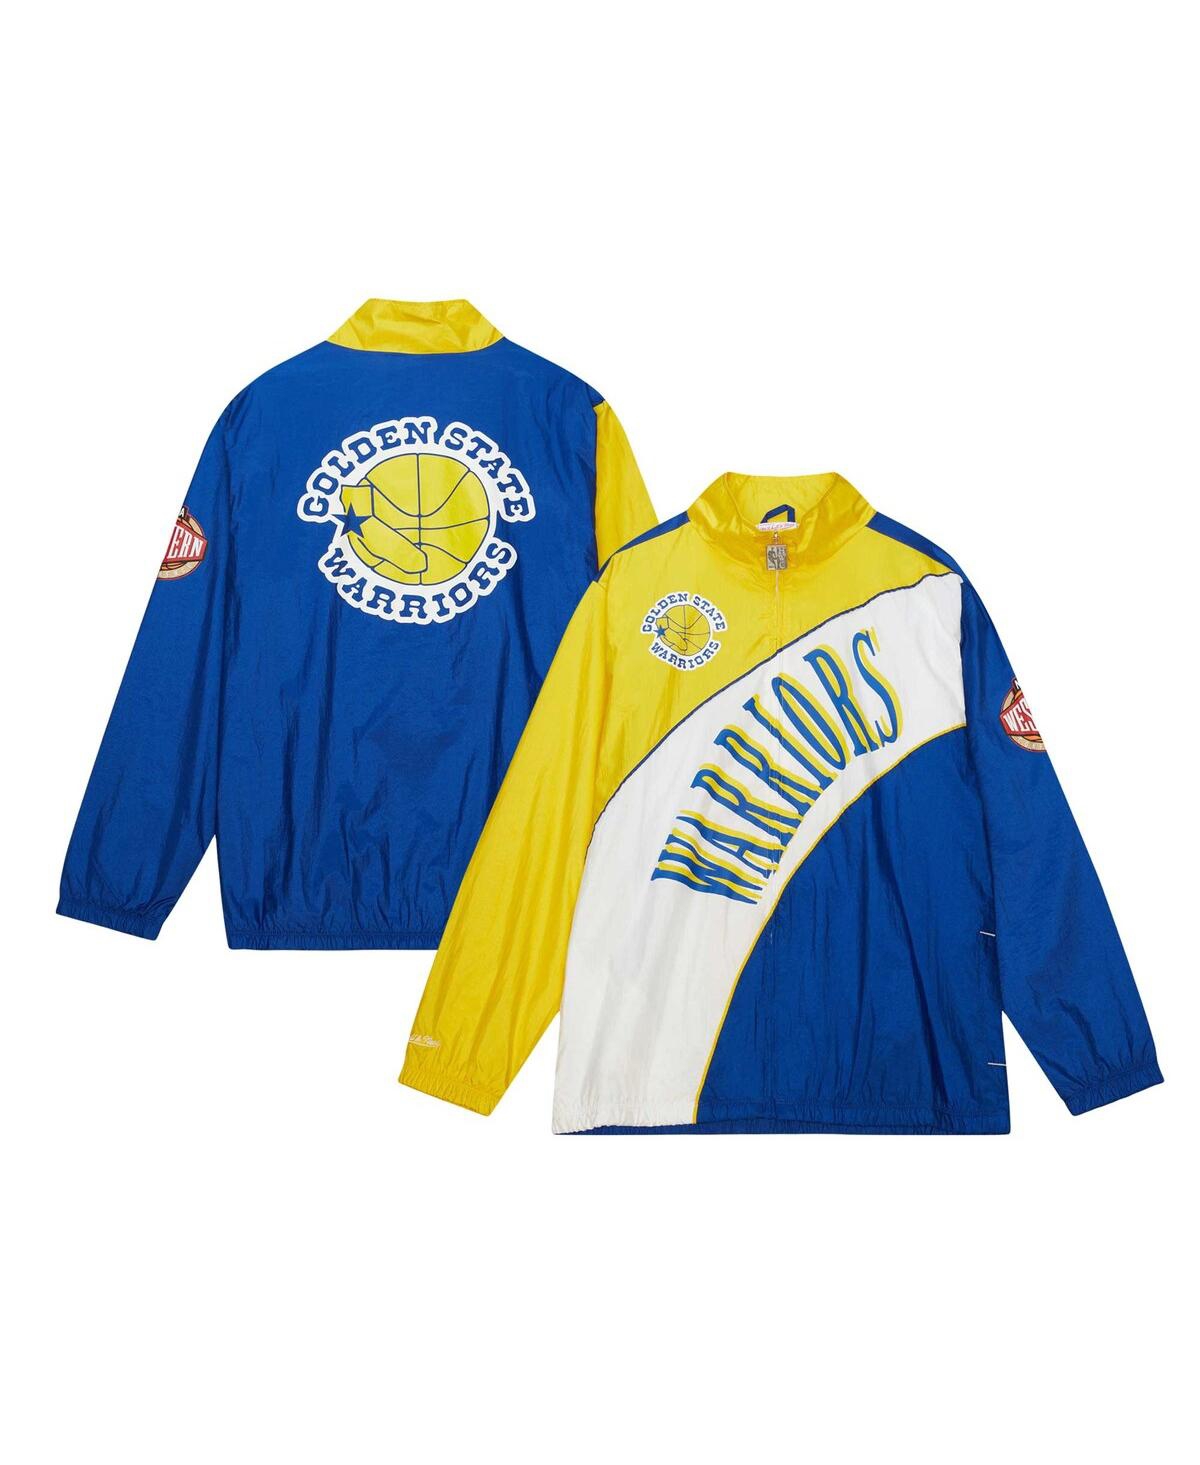 Men's Mitchell & Ness White Distressed Golden State Warriors Hardwood Classics Arched Retro Lined Full-Zip Windbreaker Jacket - White